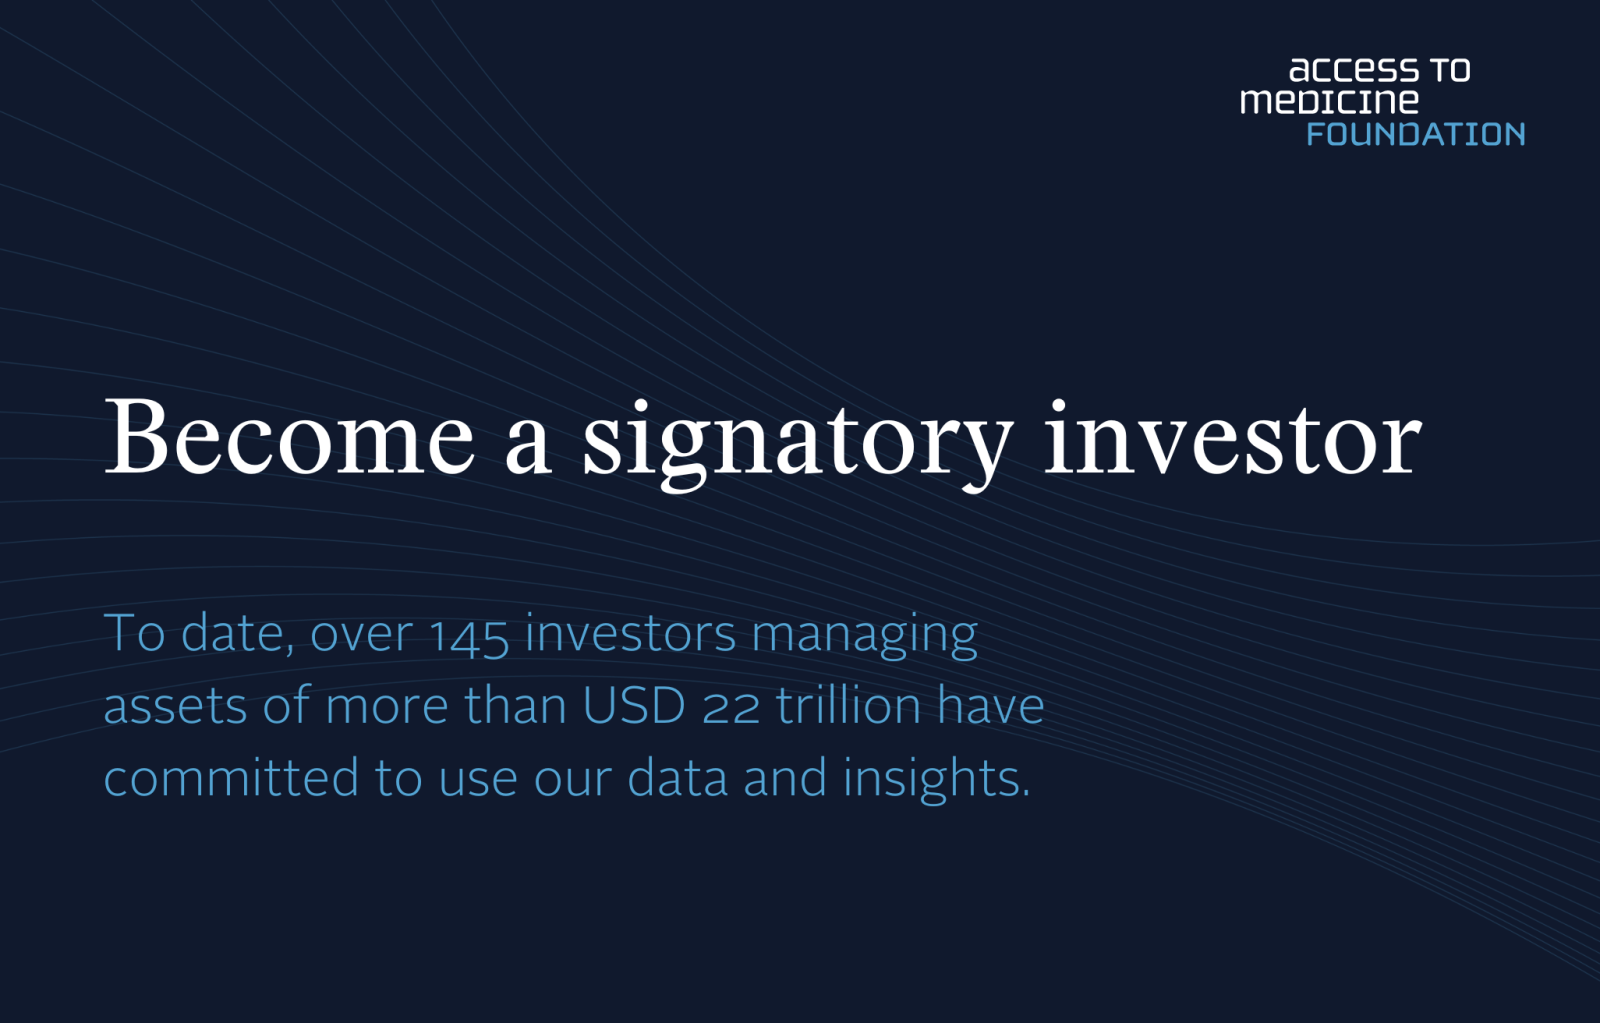 Become a signatory investor: To date, over 145 investors managing assets of more than USD 22 trillion have committed to use our data and insights.